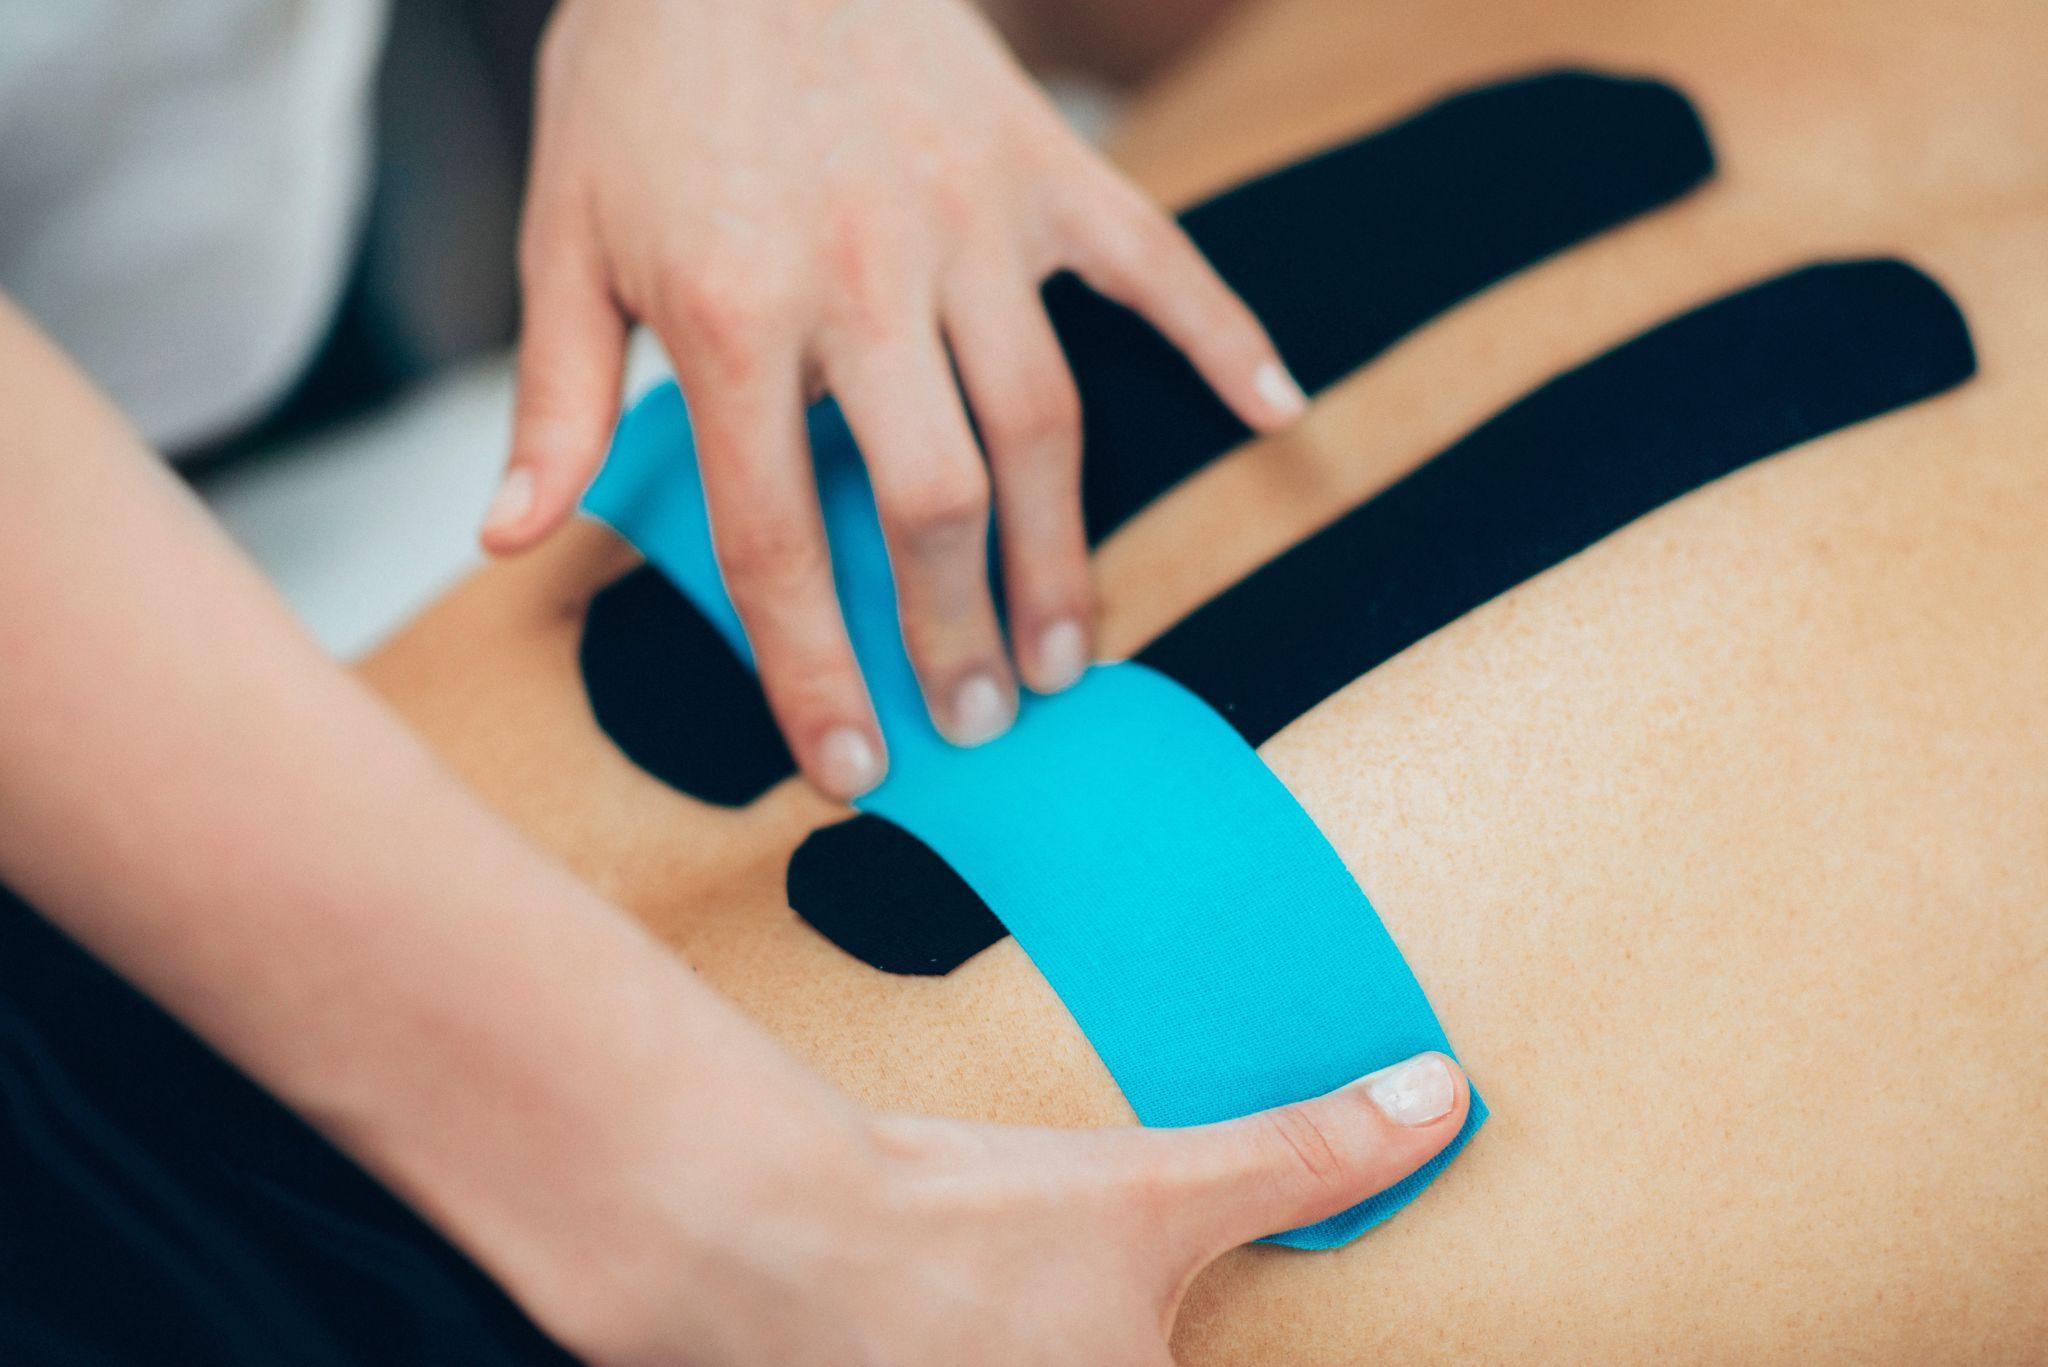 IS KINESIO TAPE AND SHOULD BE TAPING YOURSELF? - AmeriCare Physical Therapy